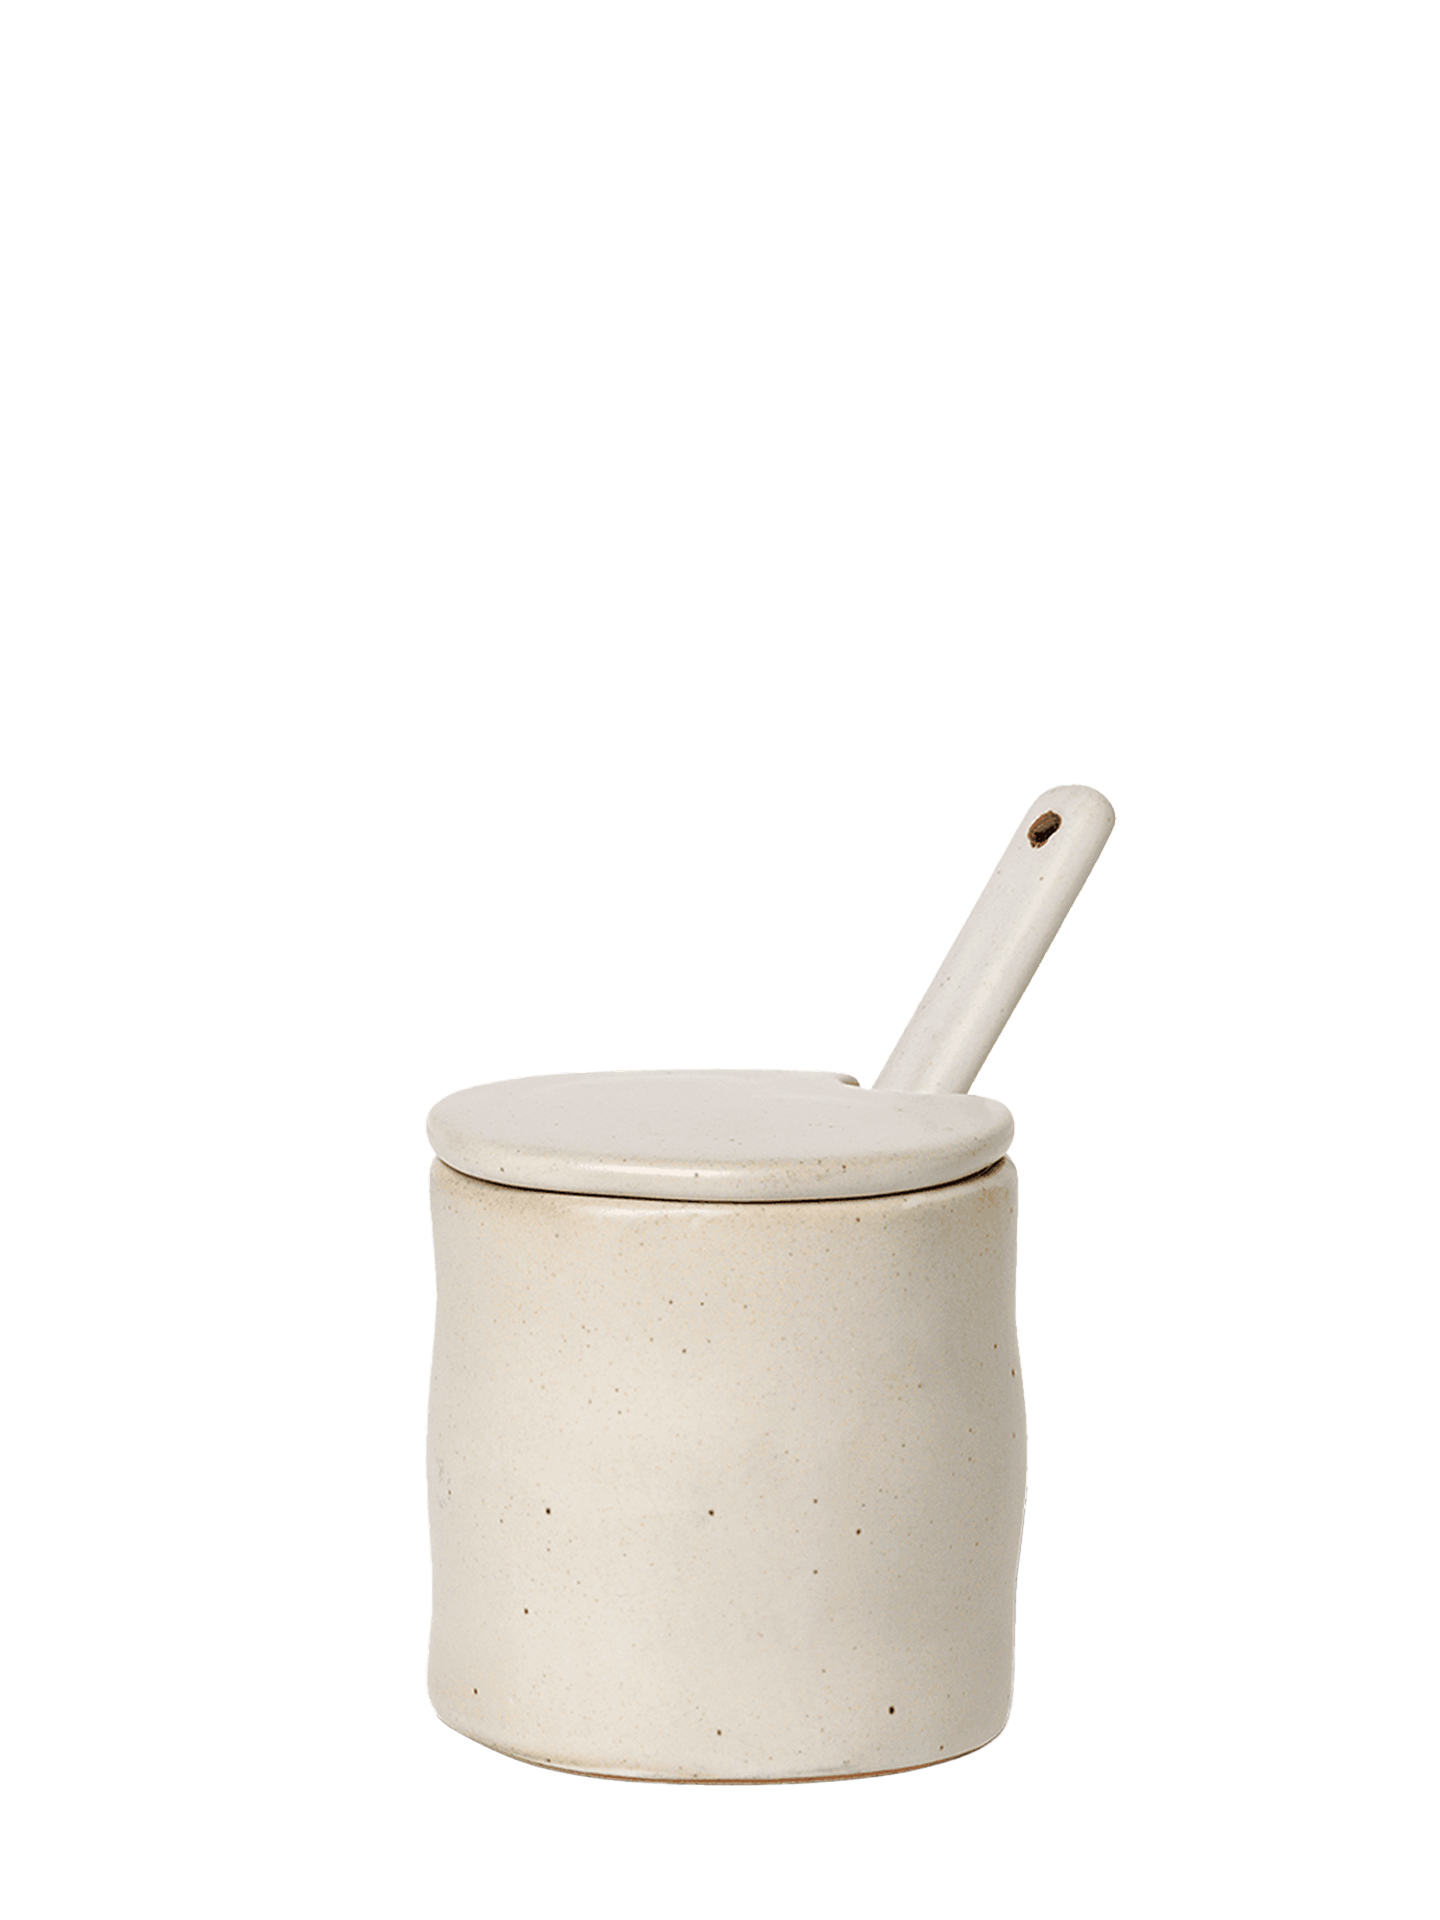 Flow Jar with spoon, Off-white w/Speckles